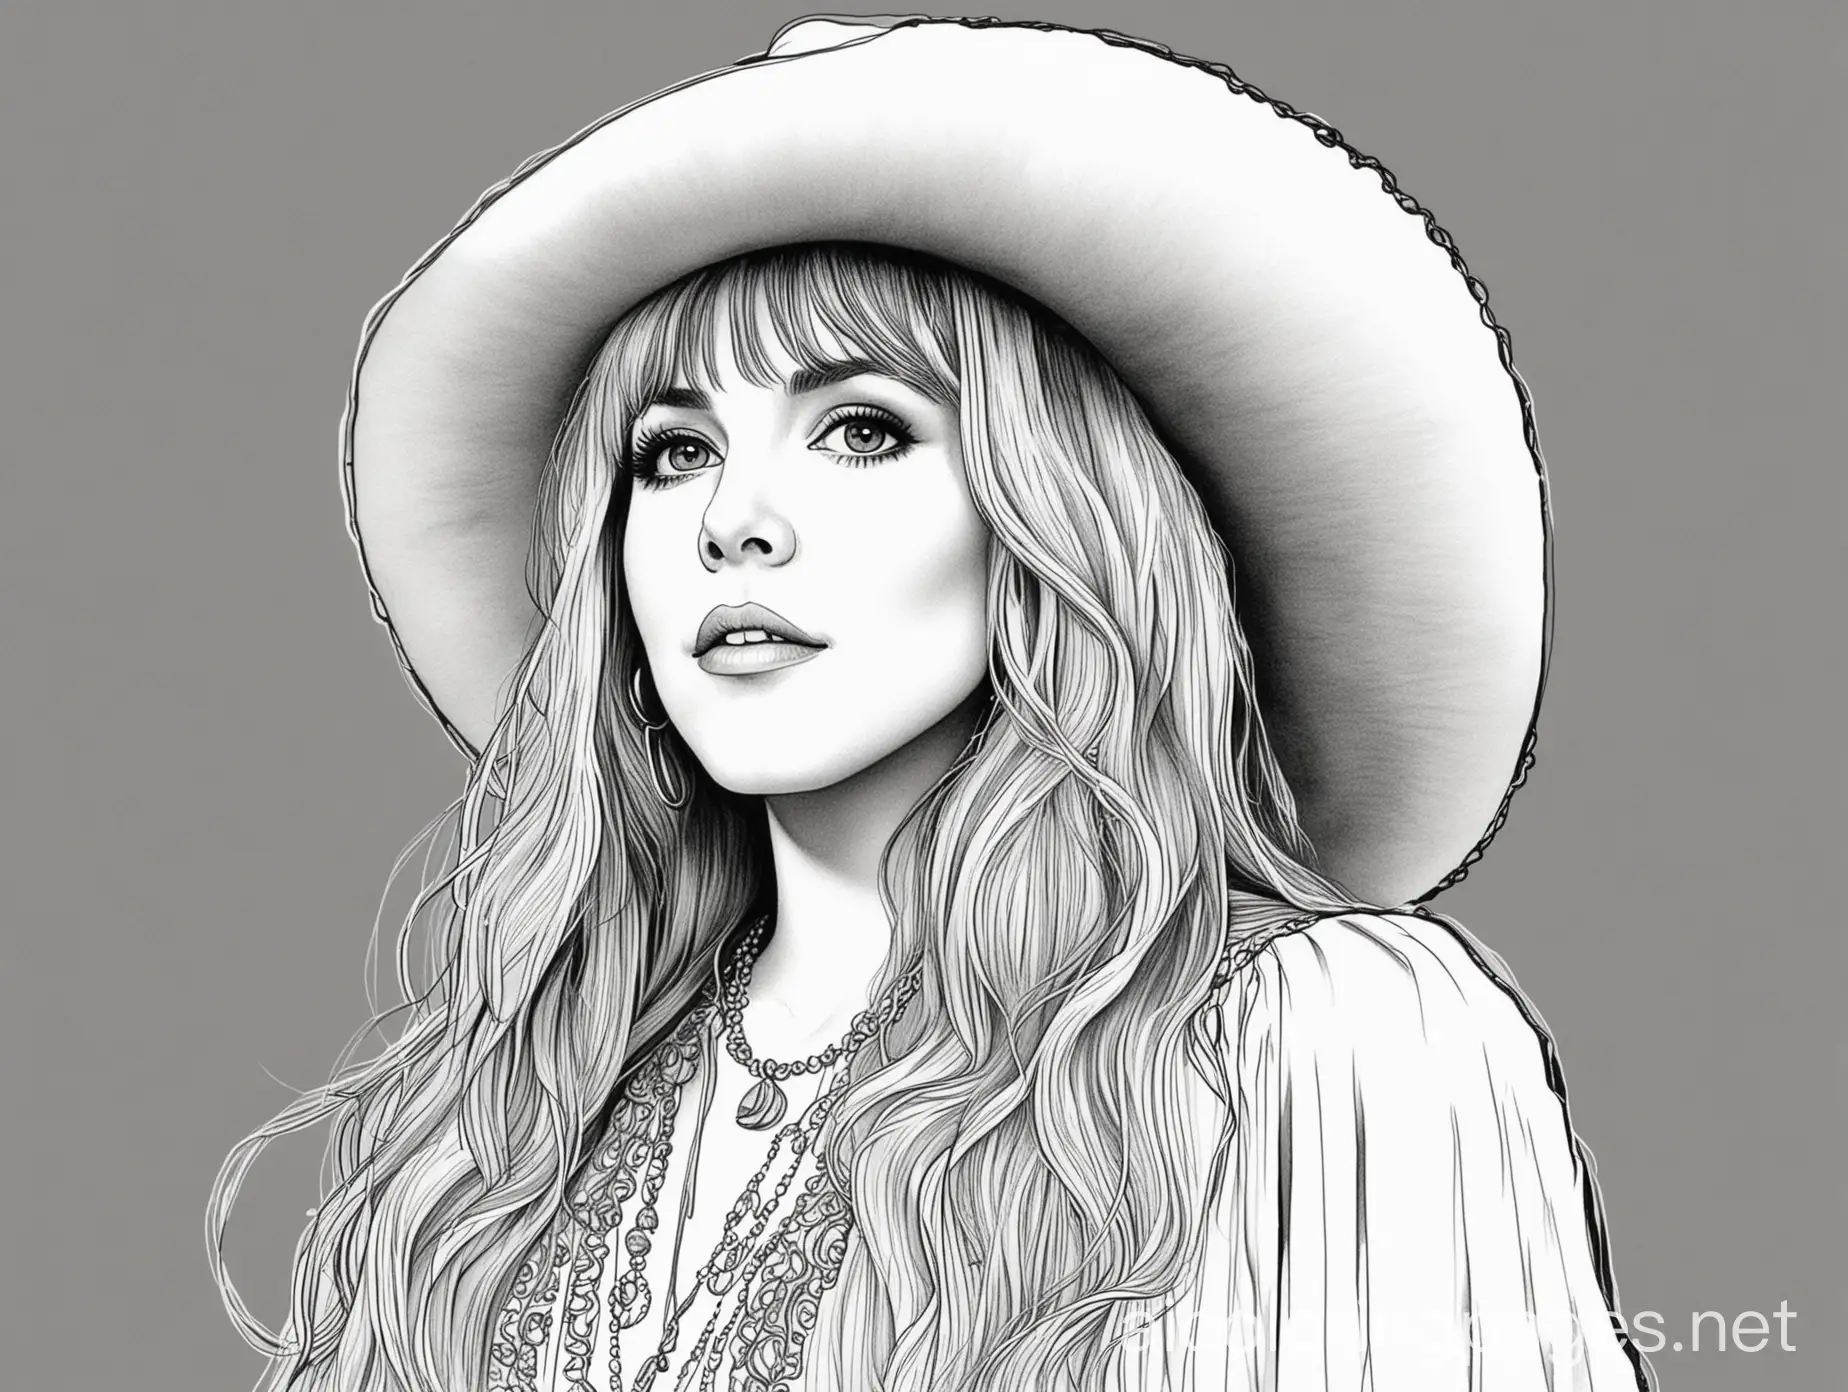 Stevie Nicks In Concert , Coloring Page, black and white, line art, white background, Simplicity, Ample White Space. The background of the coloring page is plain white to make it easy for young children to color within the lines. The outlines of all the subjects are easy to distinguish, making it simple for kids to color without too much difficulty 